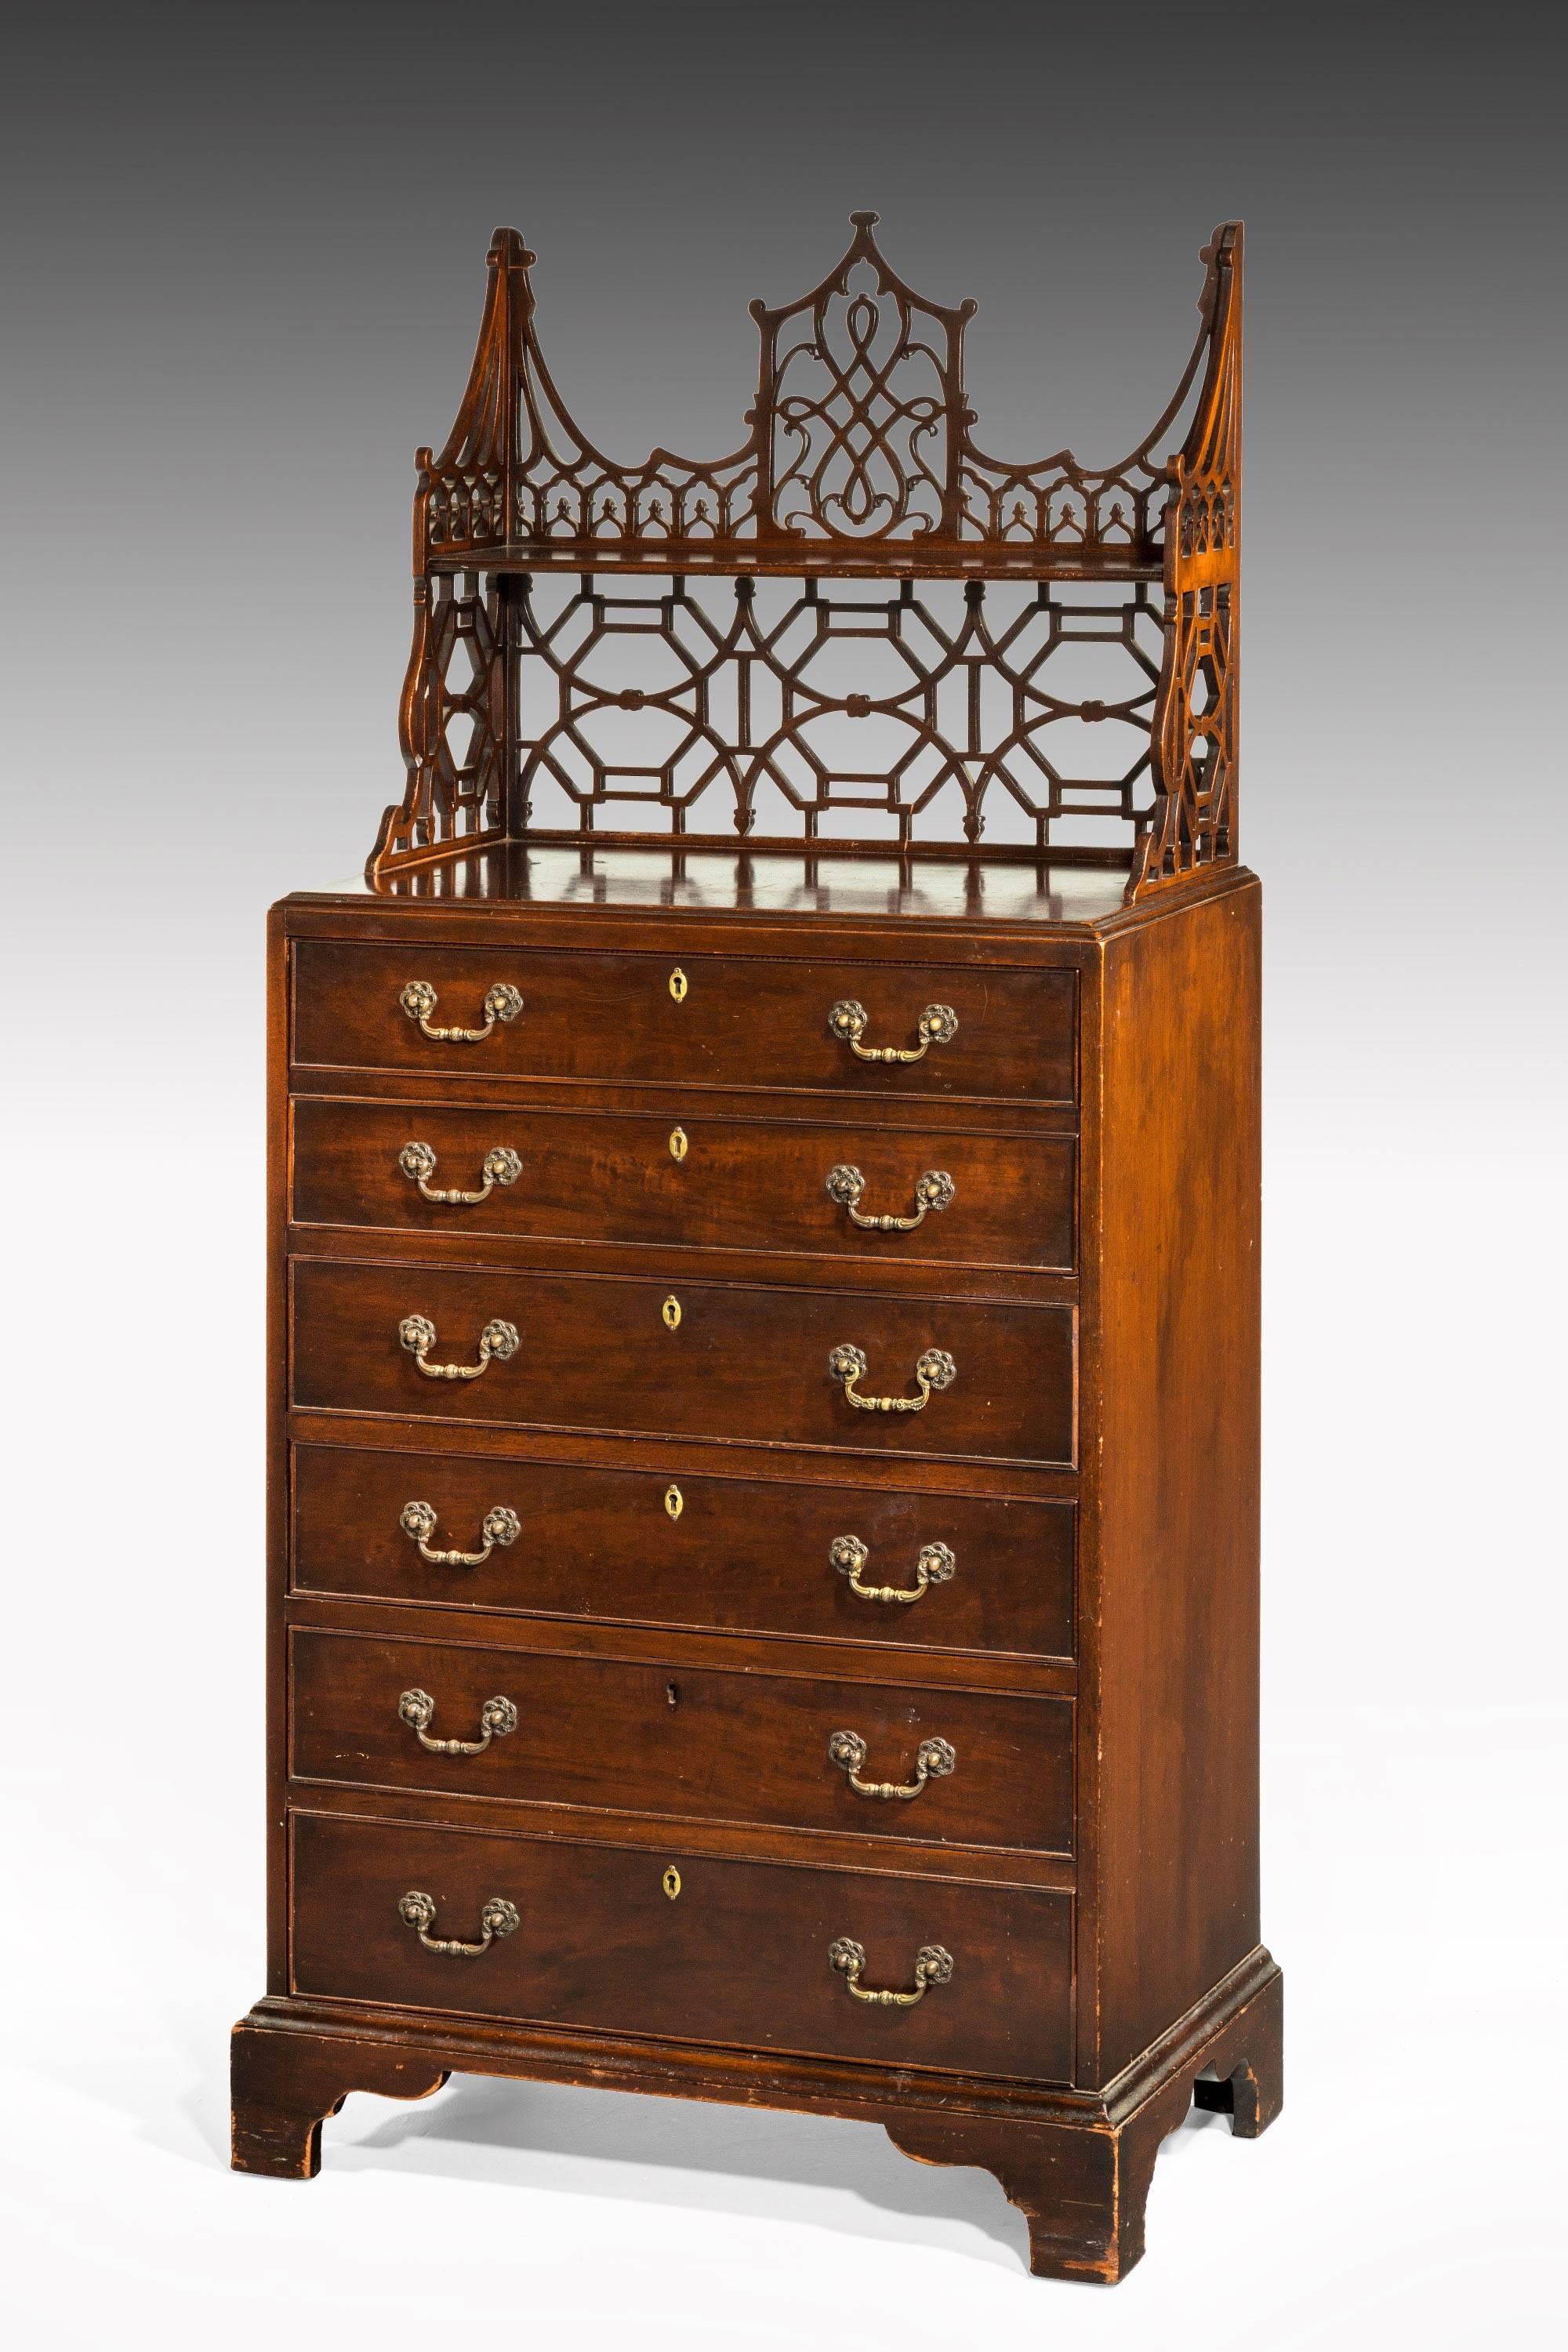 Chippendale Design Mahogany Chest of Drawers with the Original Upper Fretwork In Good Condition In Peterborough, Northamptonshire